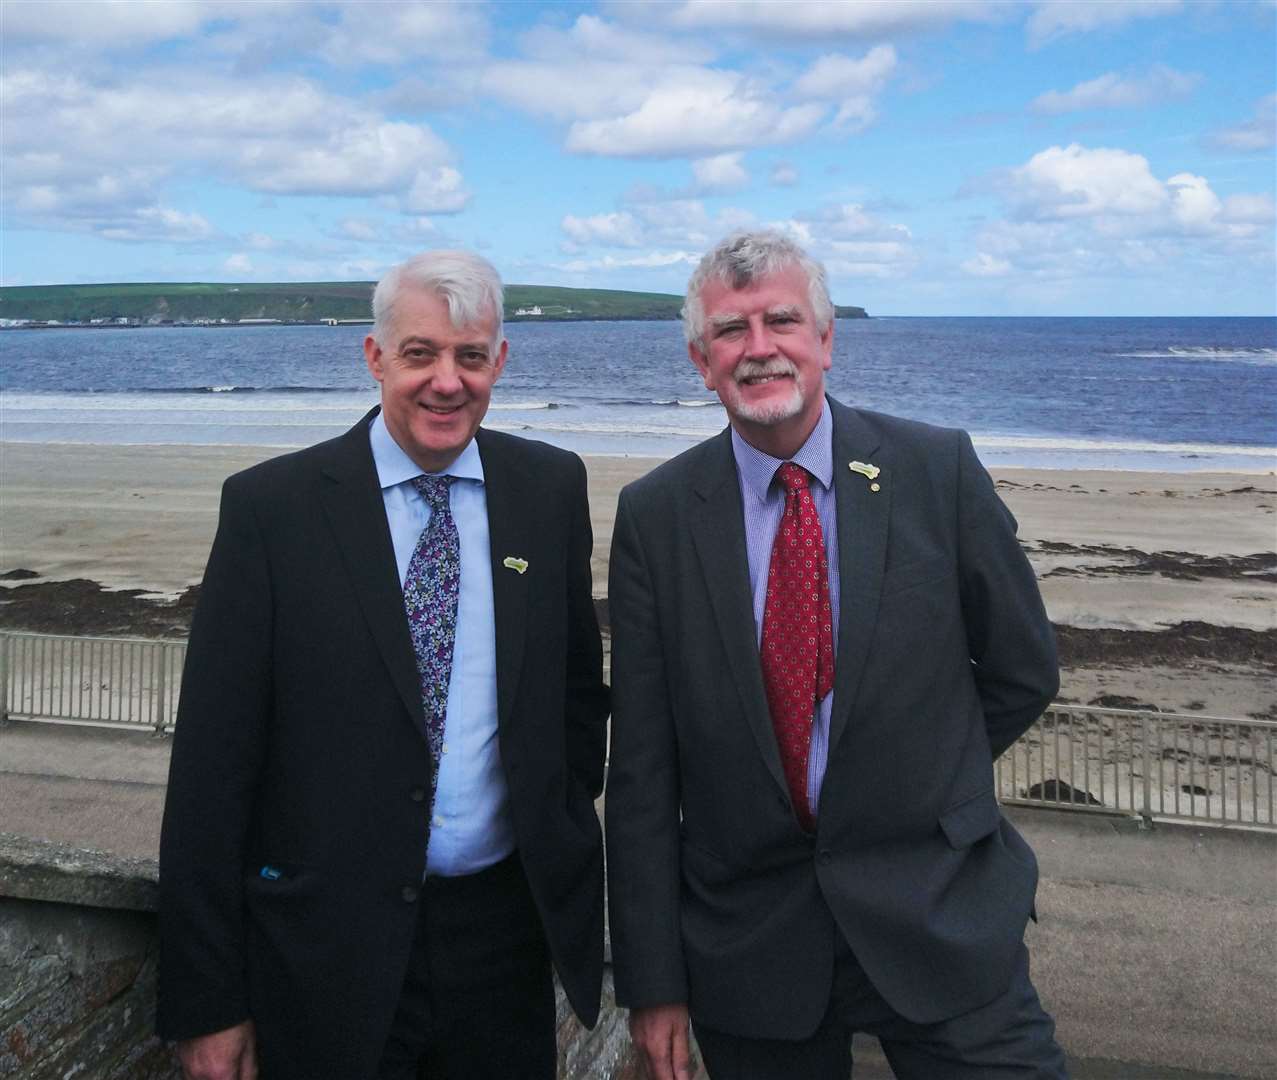 Caithness and North Sutherland Regeneration Partnership chairman Ian Ross (right) with programme manager Peter Faccenda.